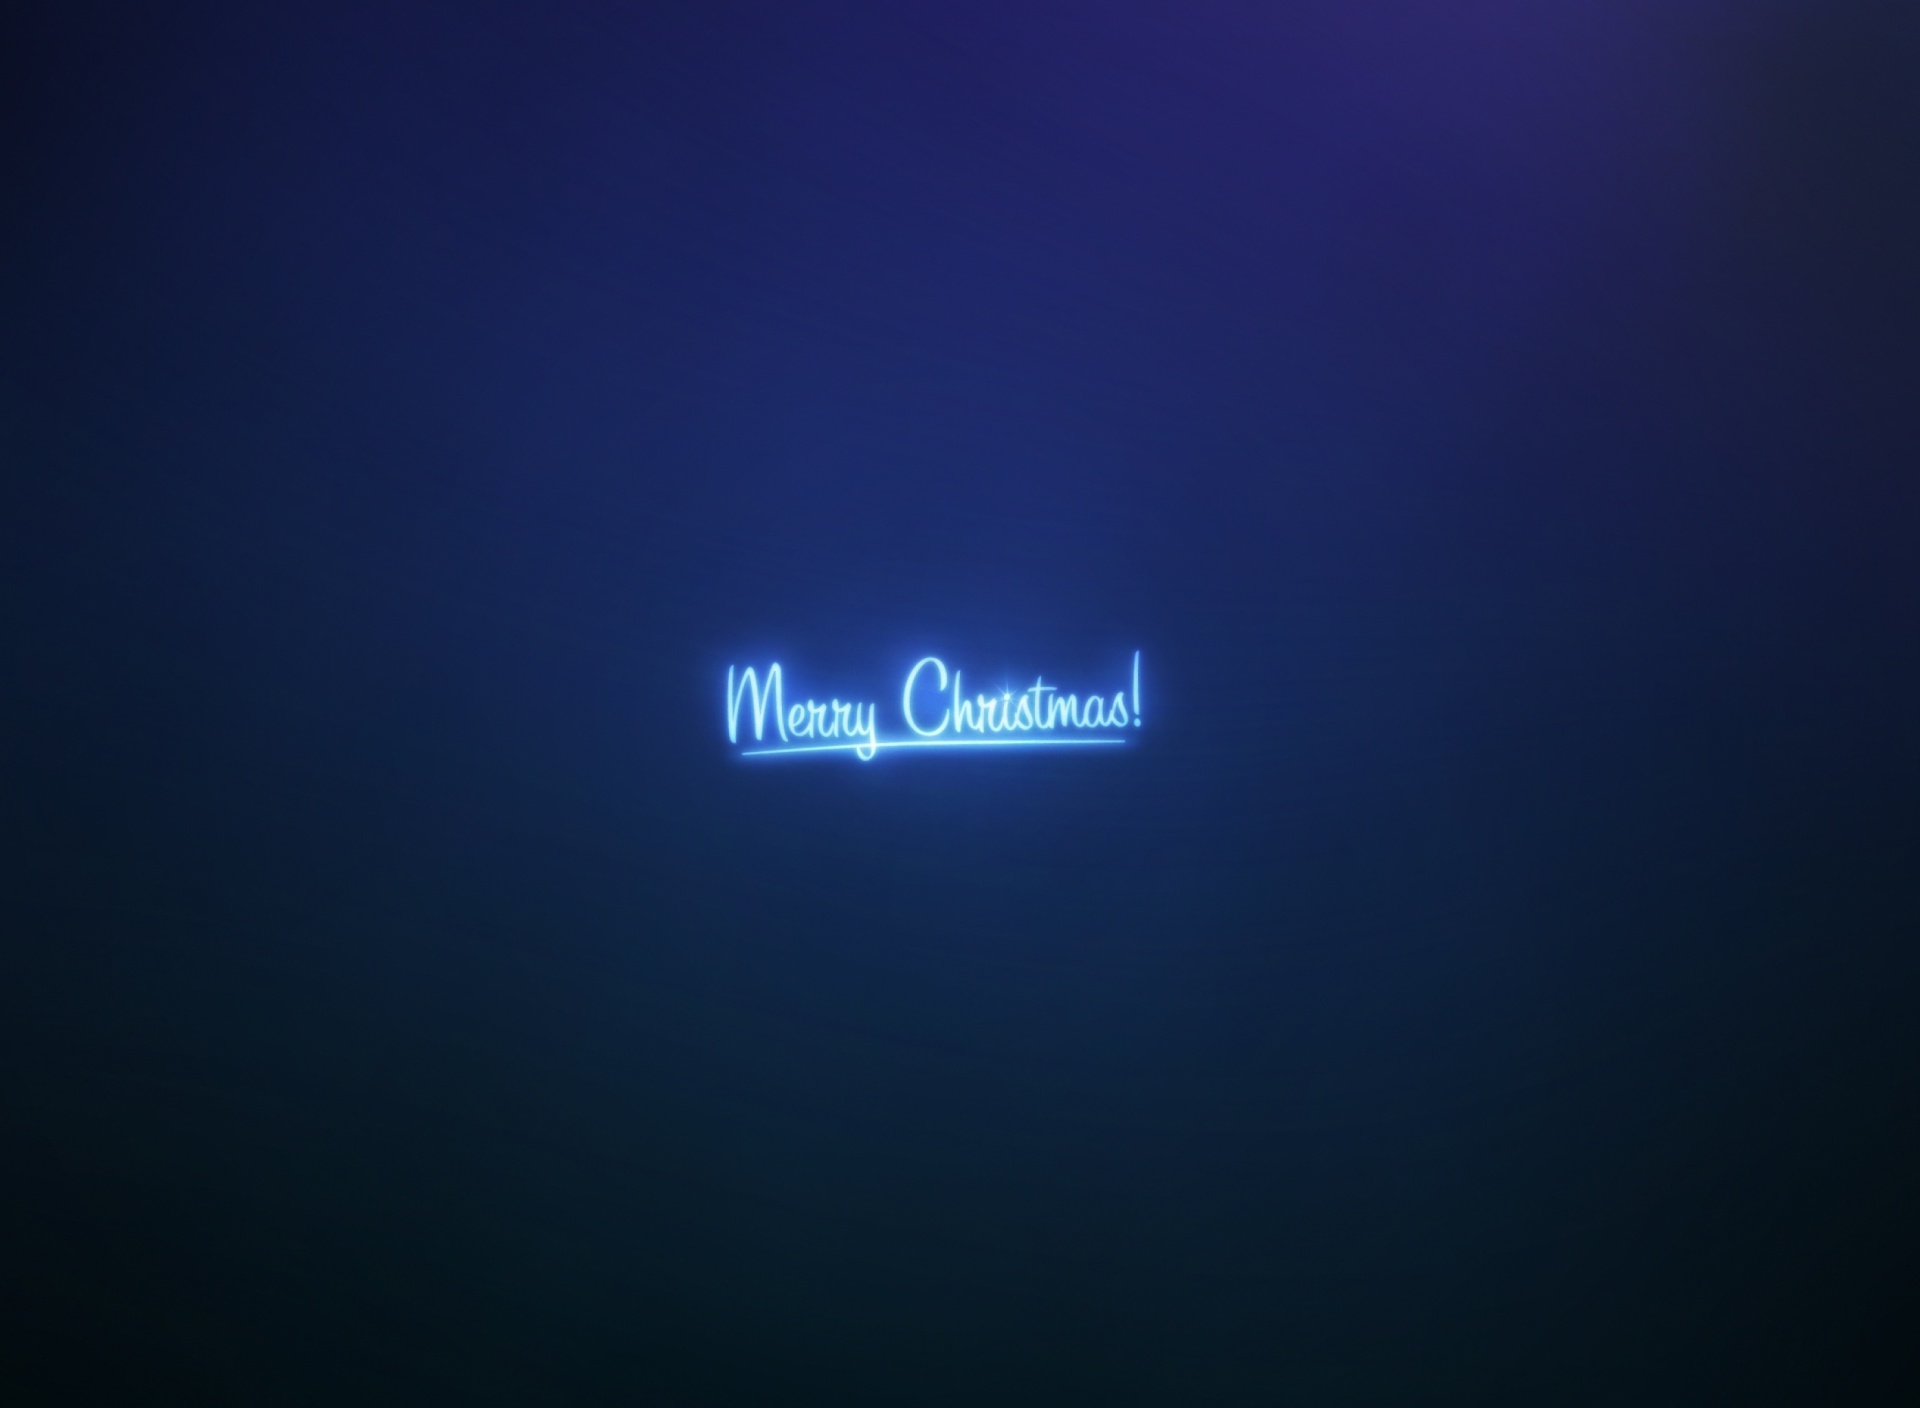 We Wish You a Merry Christmas wallpaper 1920x1408